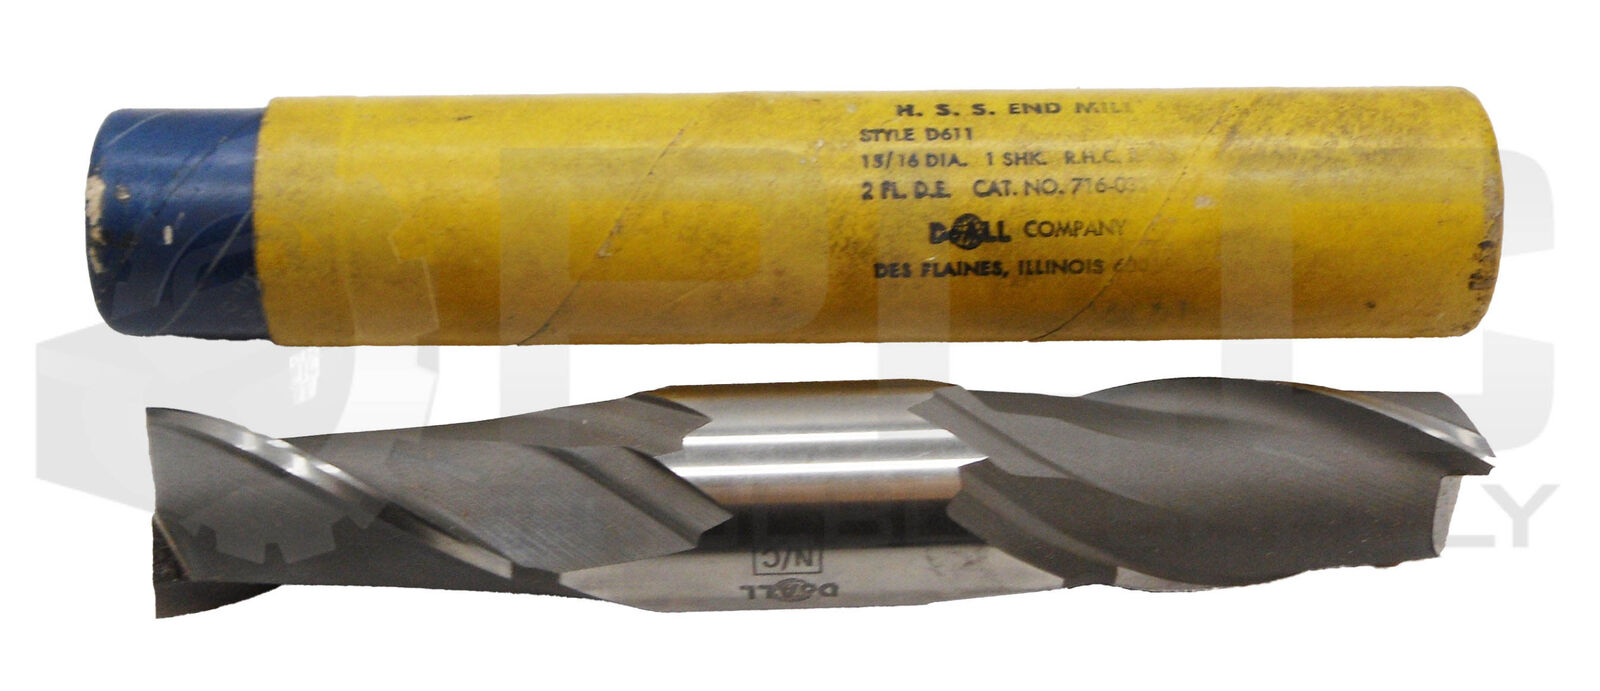 NEW DOALL COMPANY D611 END MILL DRILL 7/8\